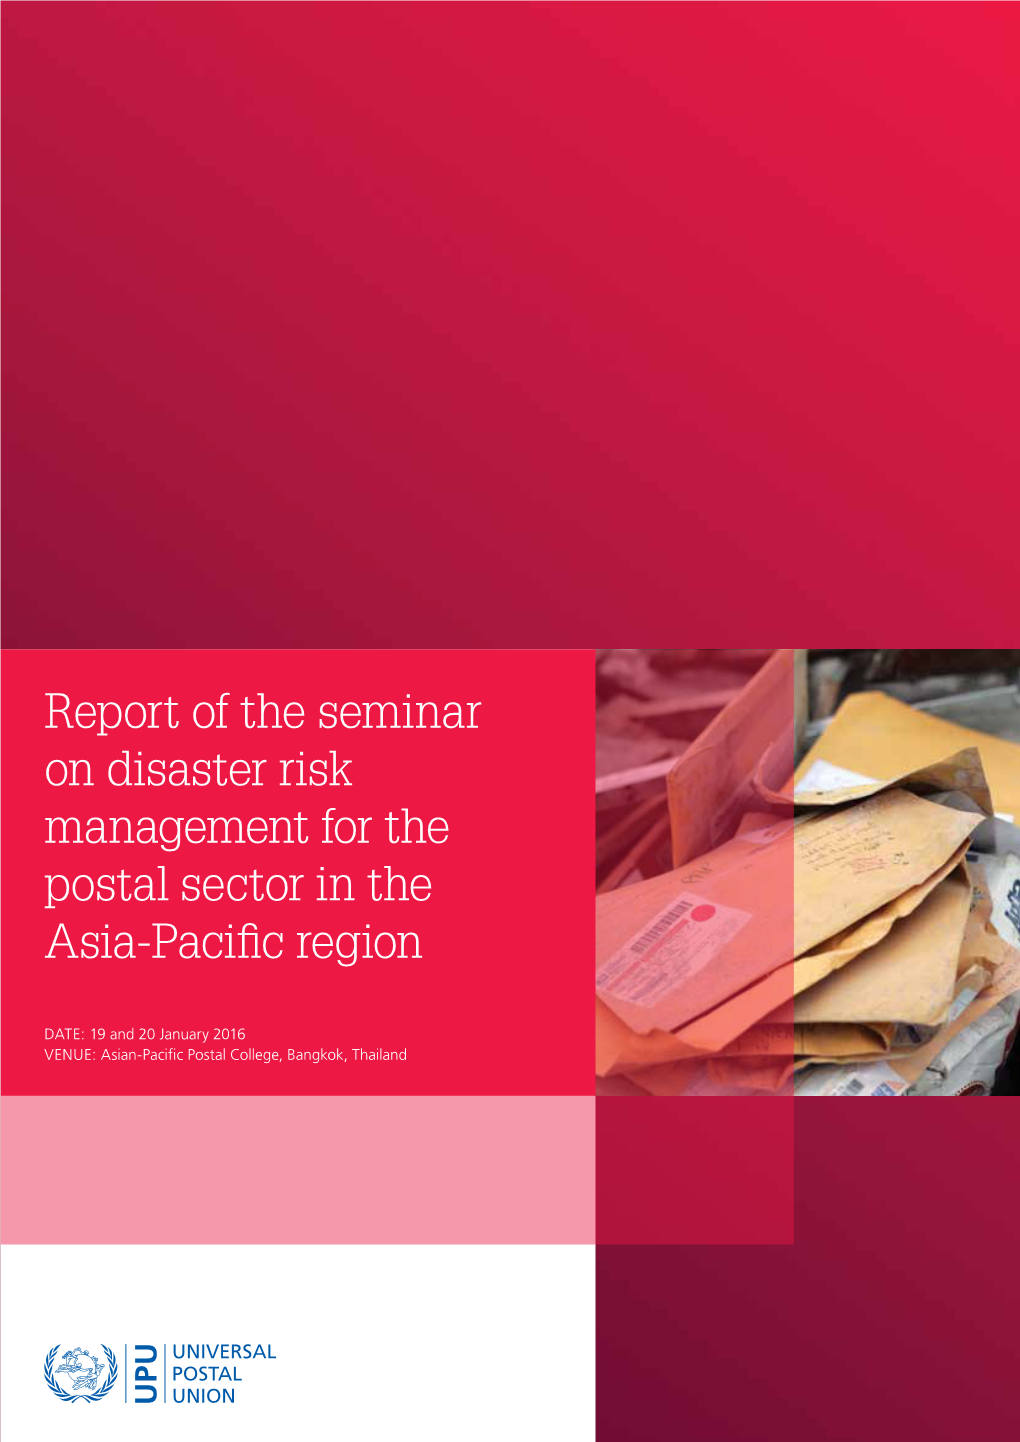 Report of the Seminar on Disaster Risk Management for the Postal Sector in the Asia-Pacific Region